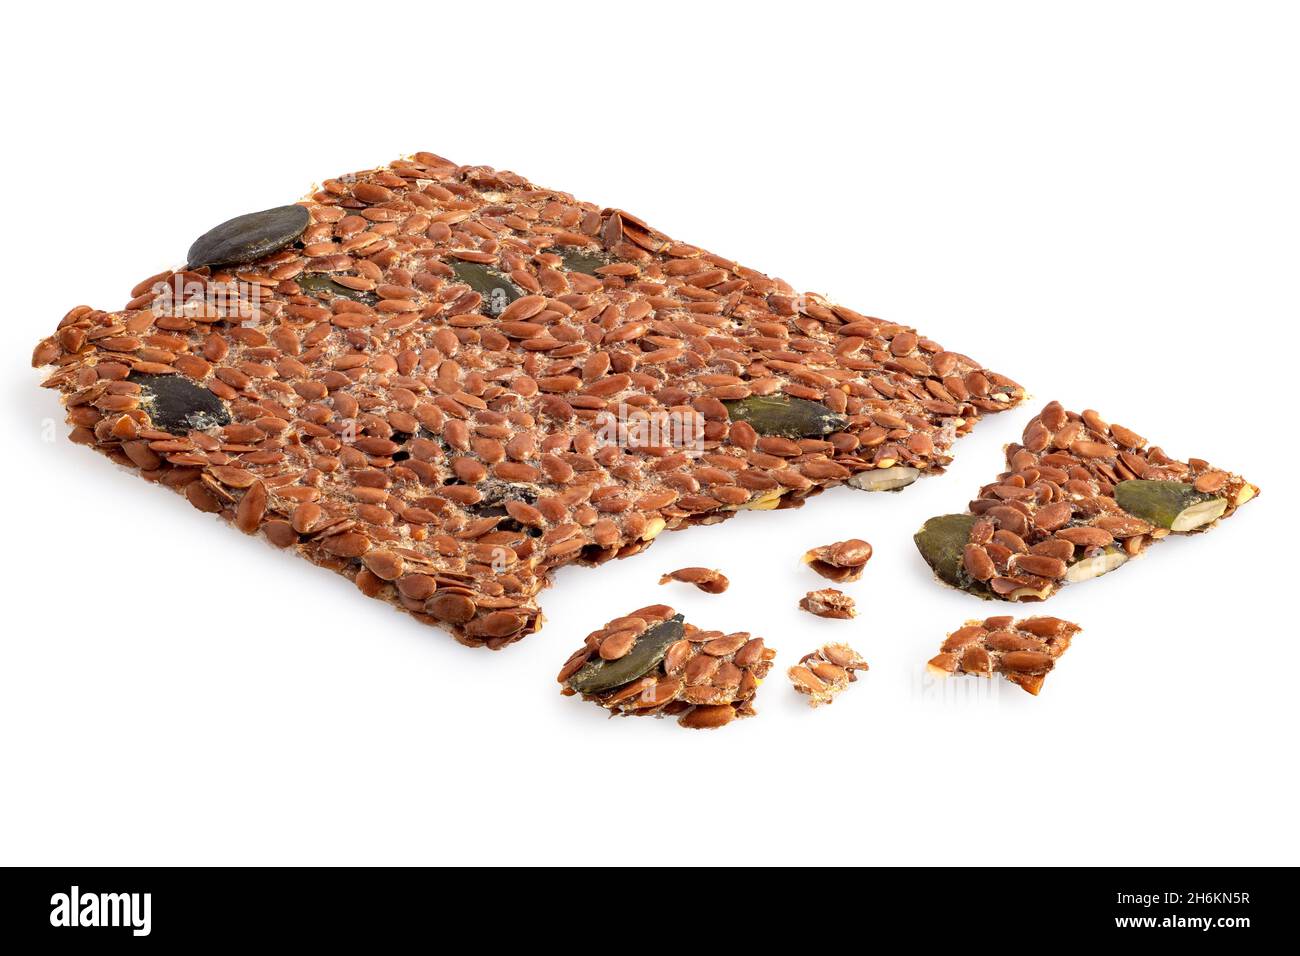 Linseed and pumpkin raw cracker isolated on white. Broken pieces. Stock Photo